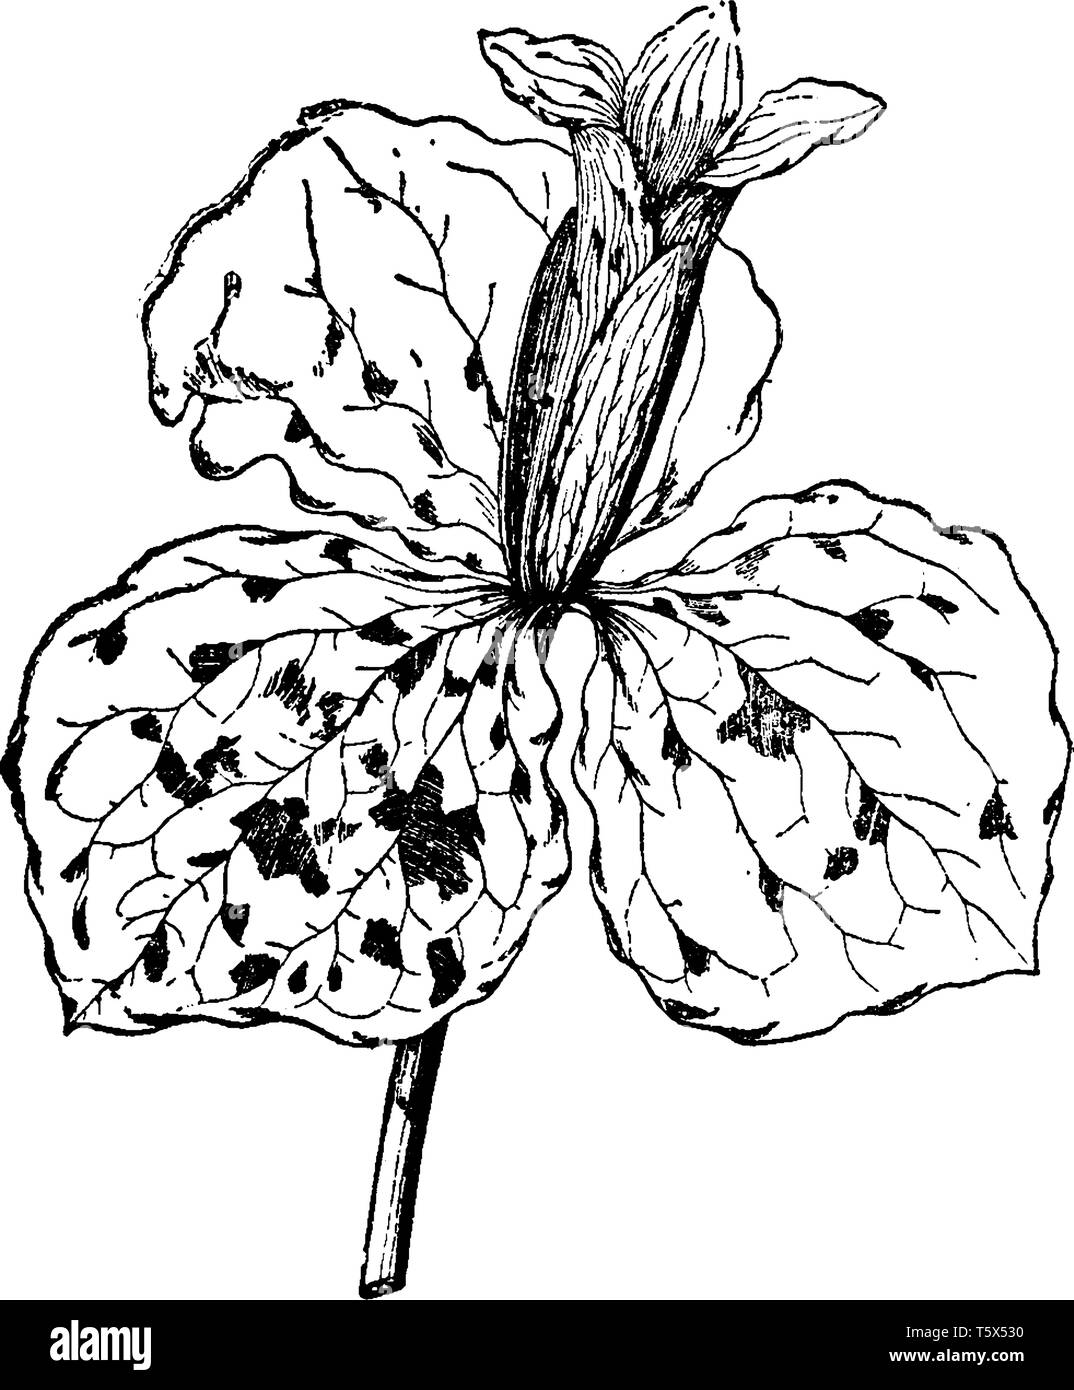 A picture shows Trillium Sessile Plant. Flowers are red, purple and funnel-bell shaped. This flora is known for its strong smell. Leaves are flat, cir Stock Vector